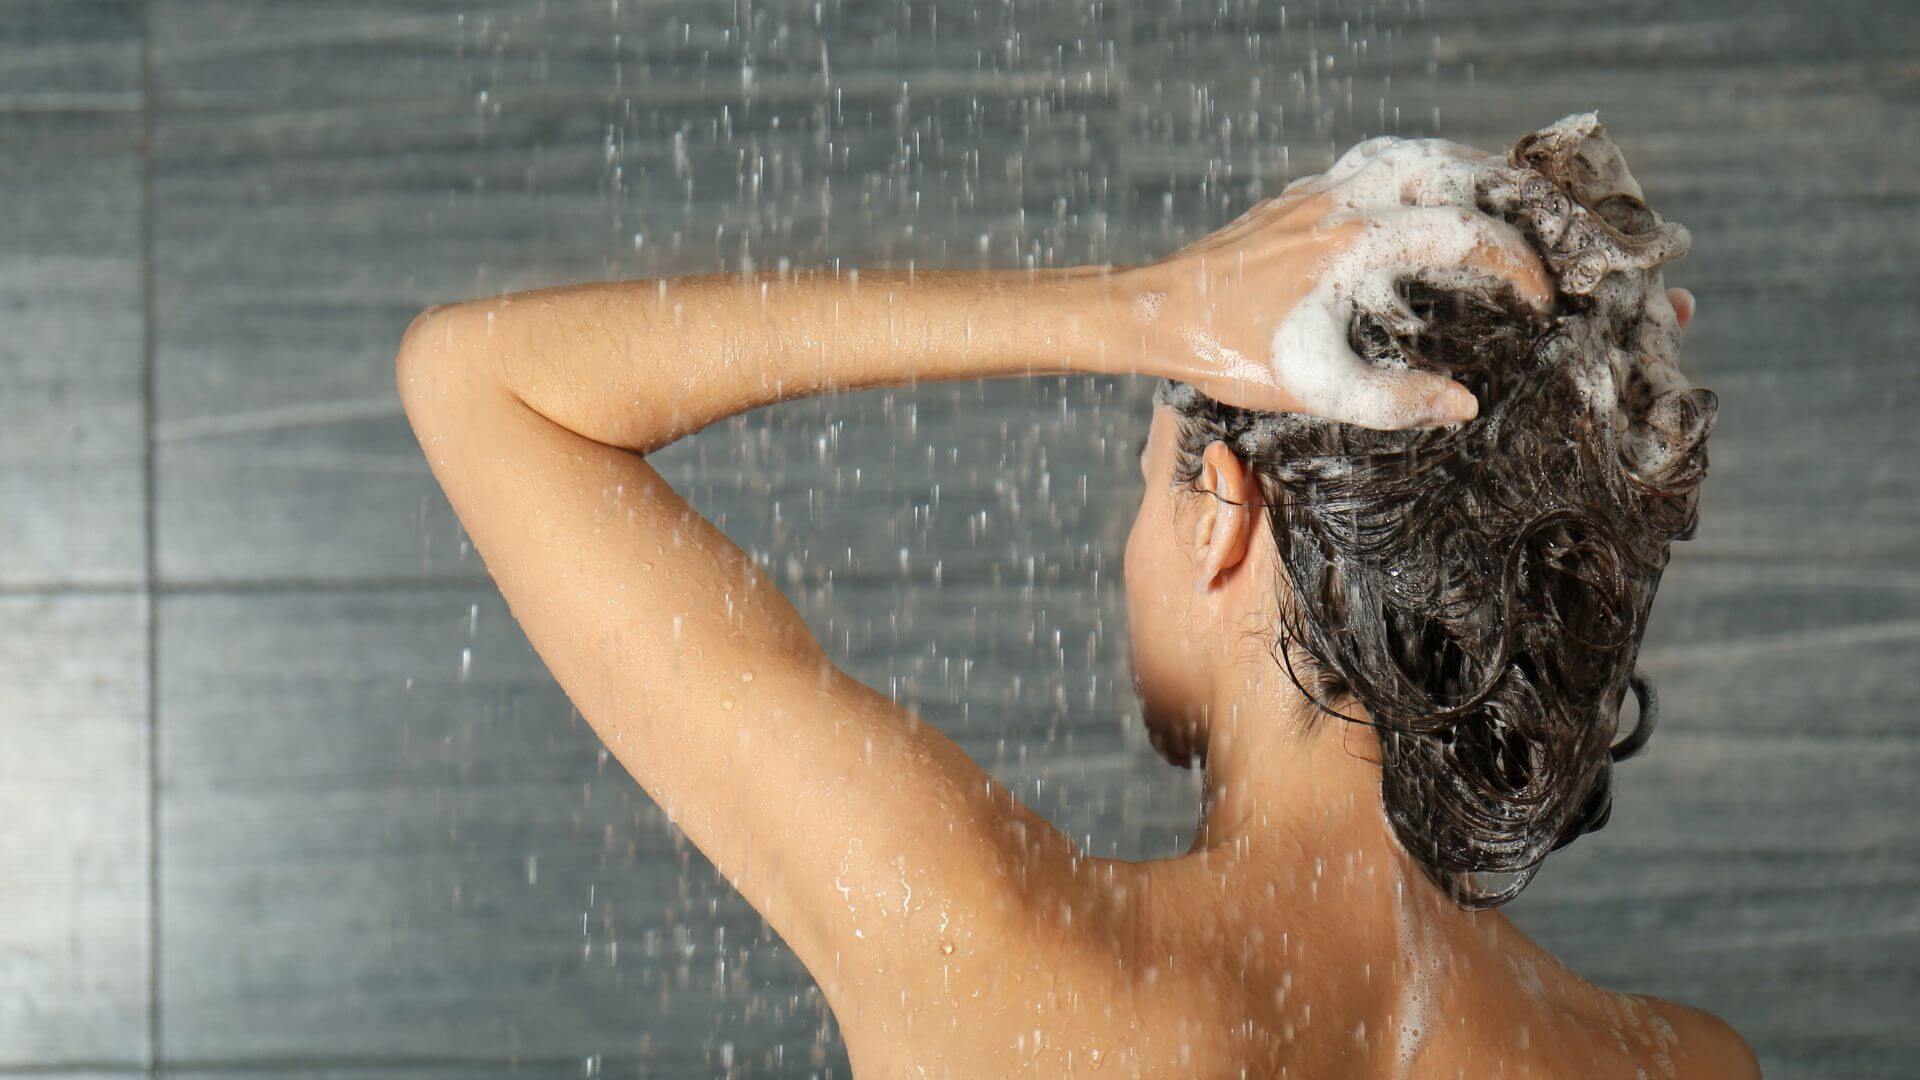 Woman in shower washing her hair